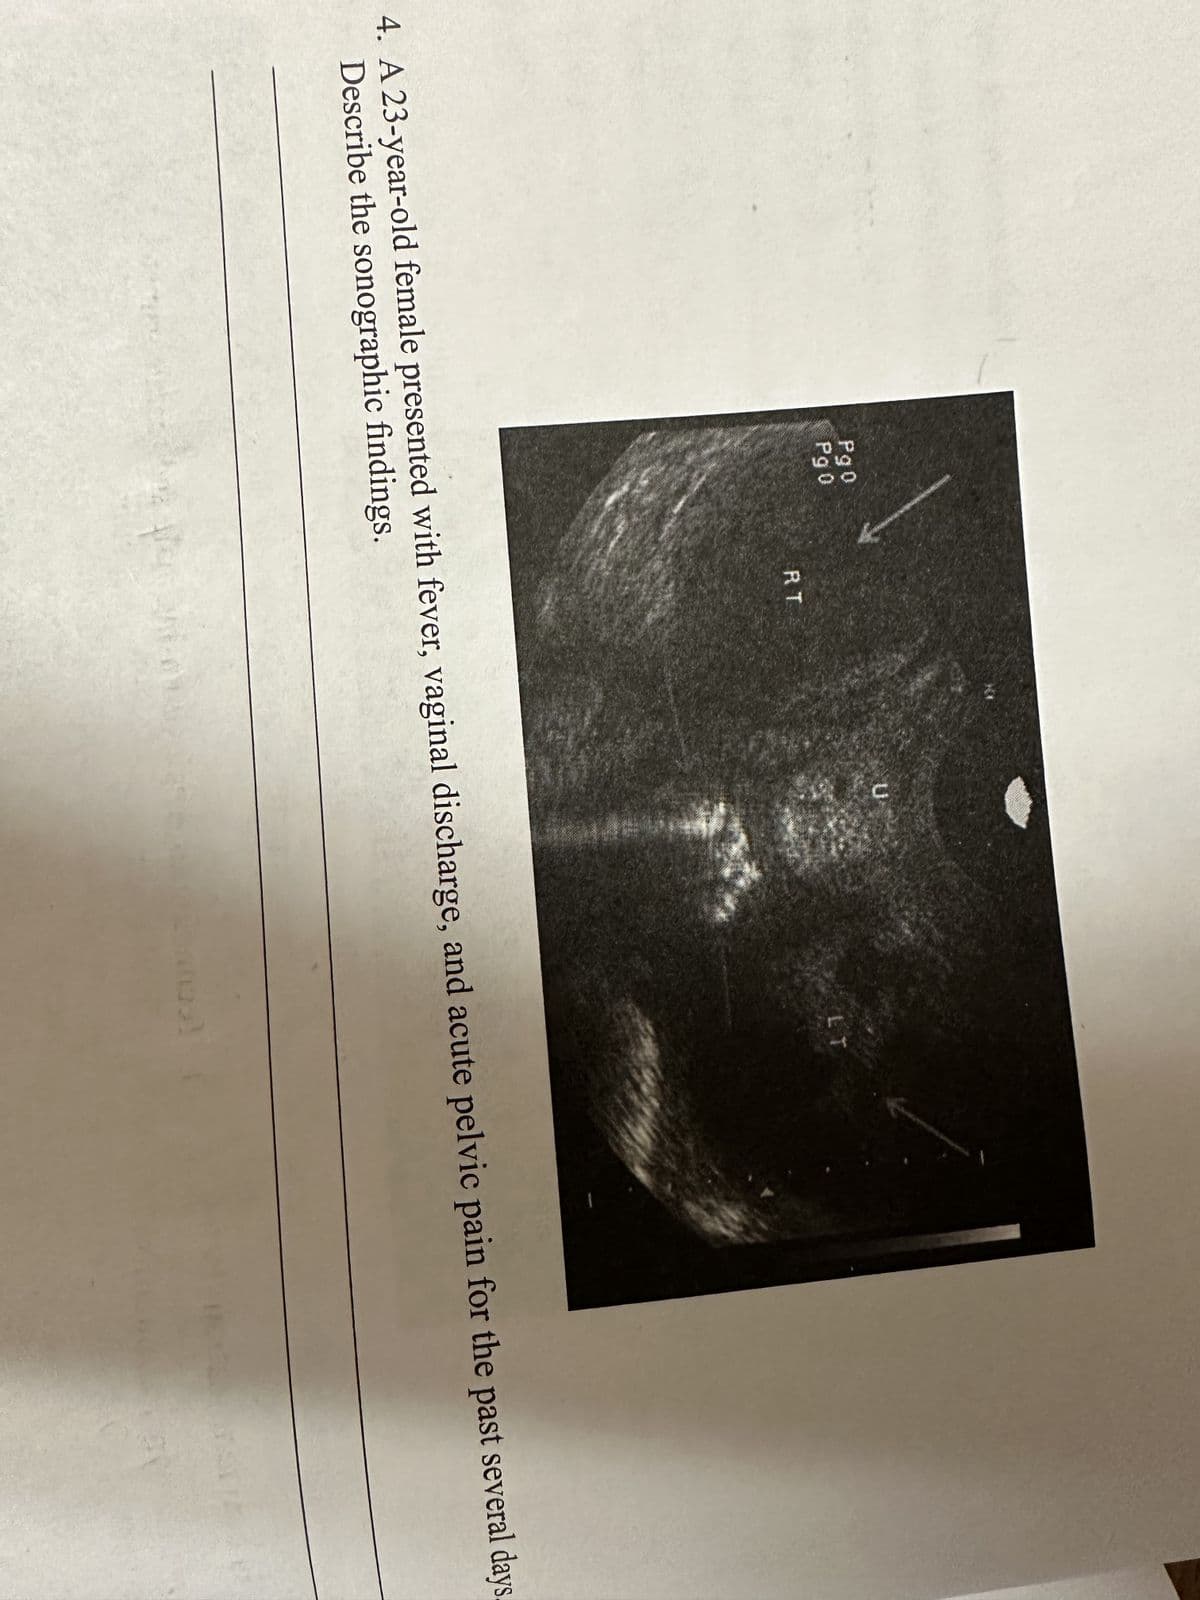 Pg0
Pg0
LT
4. A 23-year-old female presented with fever, vaginal discharge, and acute pelvic pain for the past several days.
Describe the sonographic findings.
a fen
ter vin